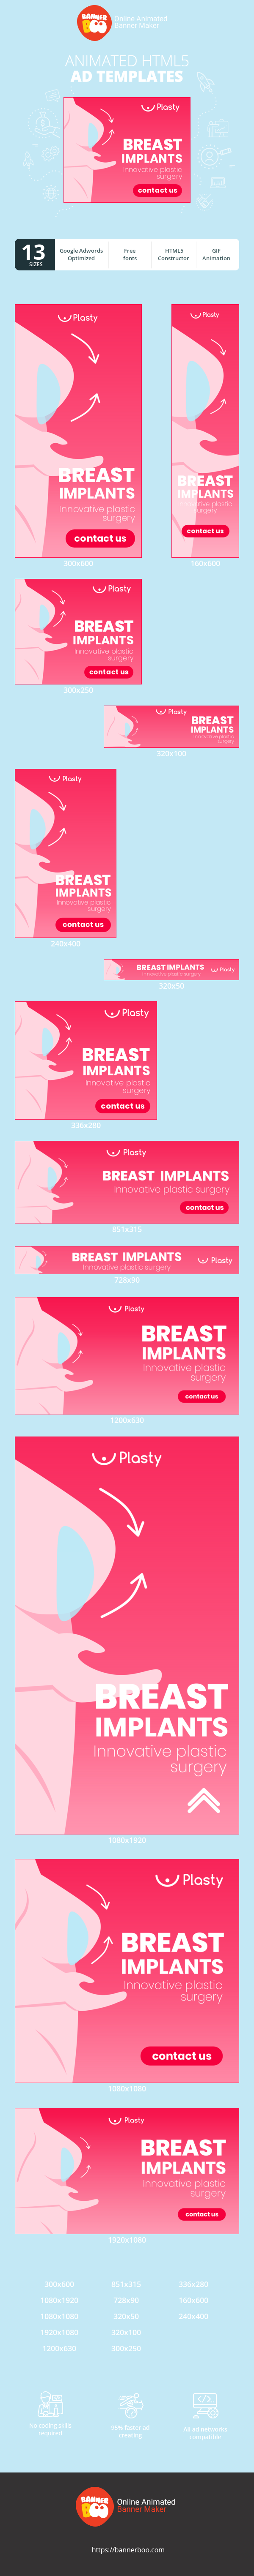 Szablon reklamy banerowej — New Look For You — Breast Implants Innovative Surgery